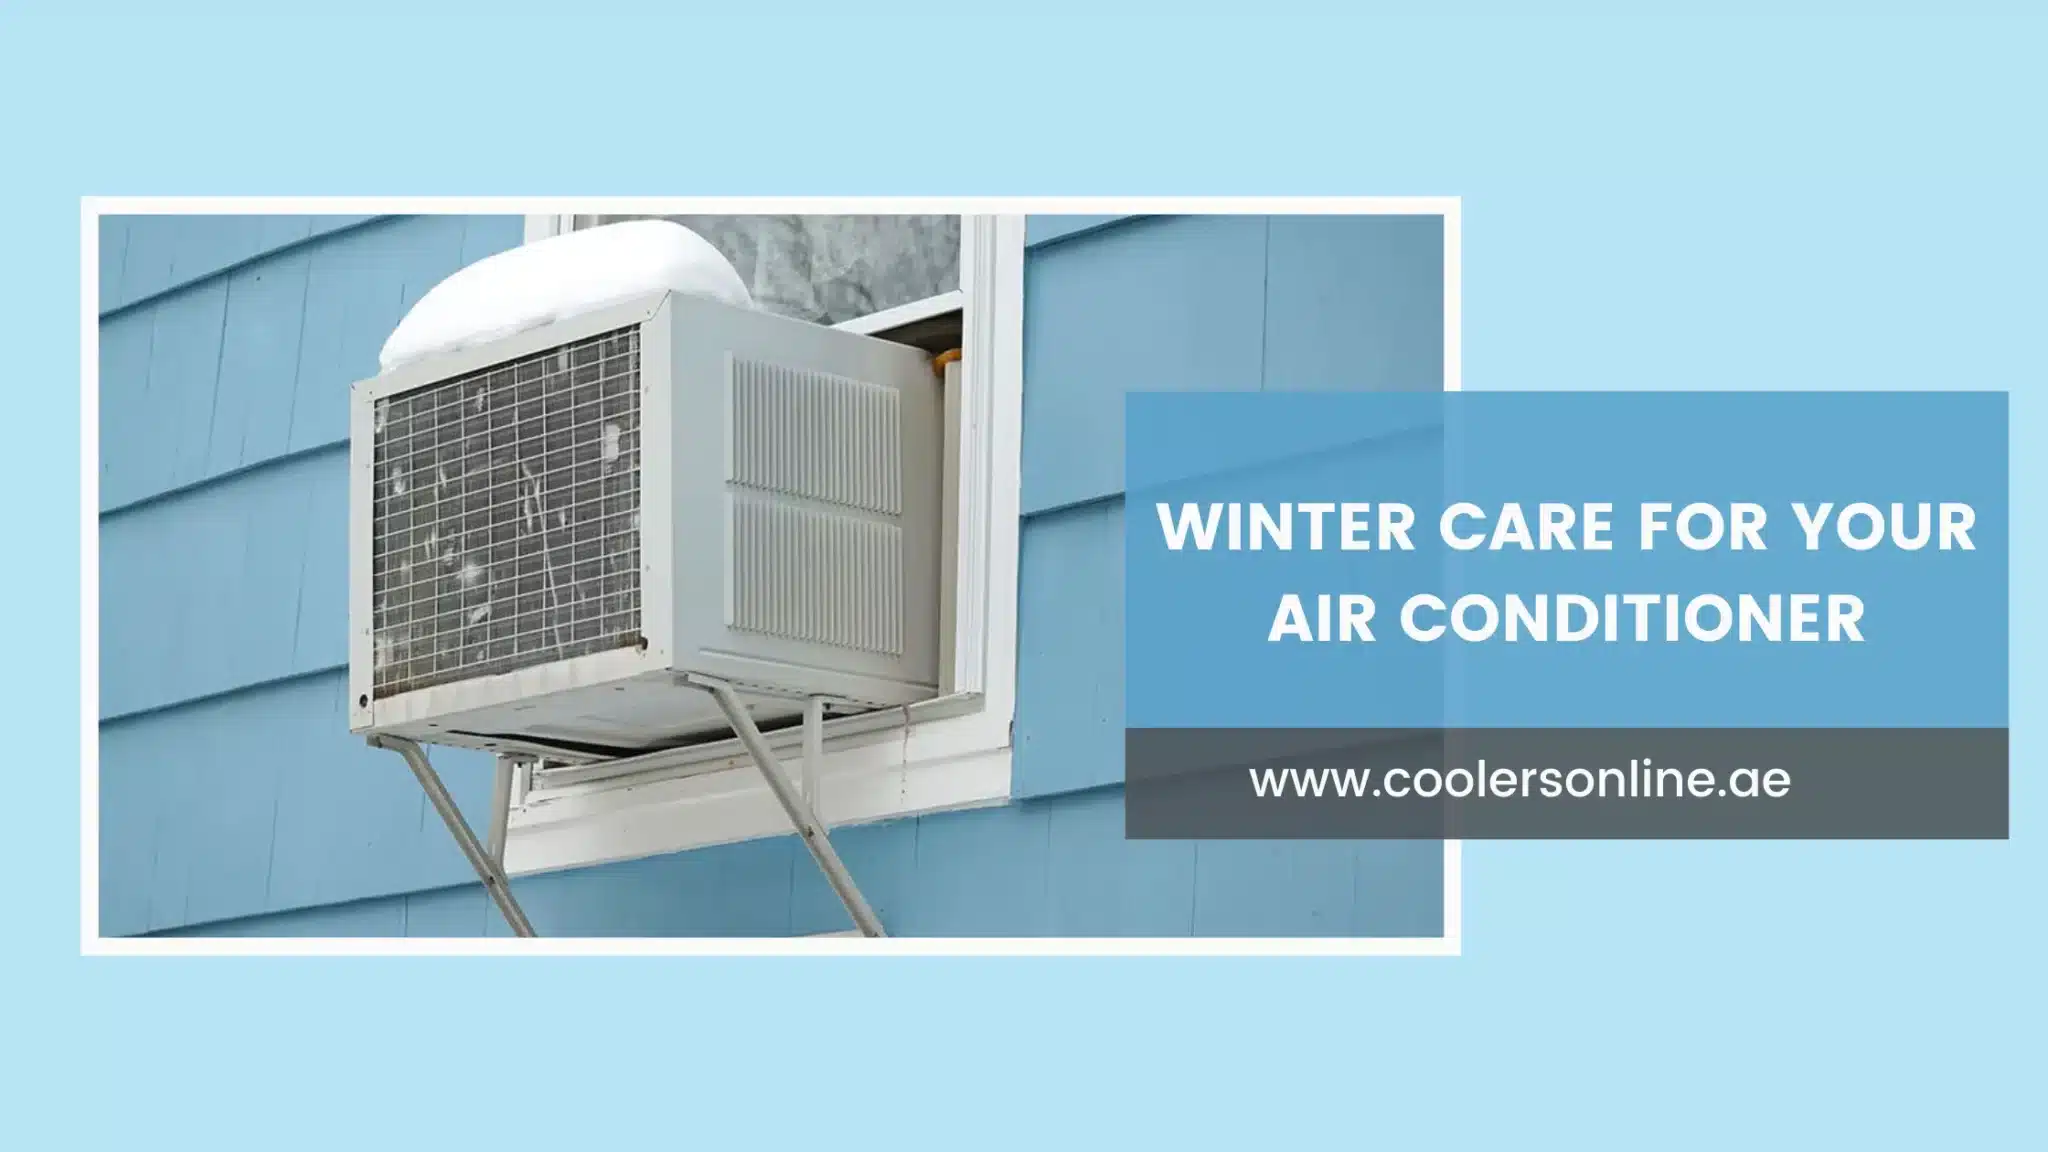 Winter Care For Your Air Conditioner